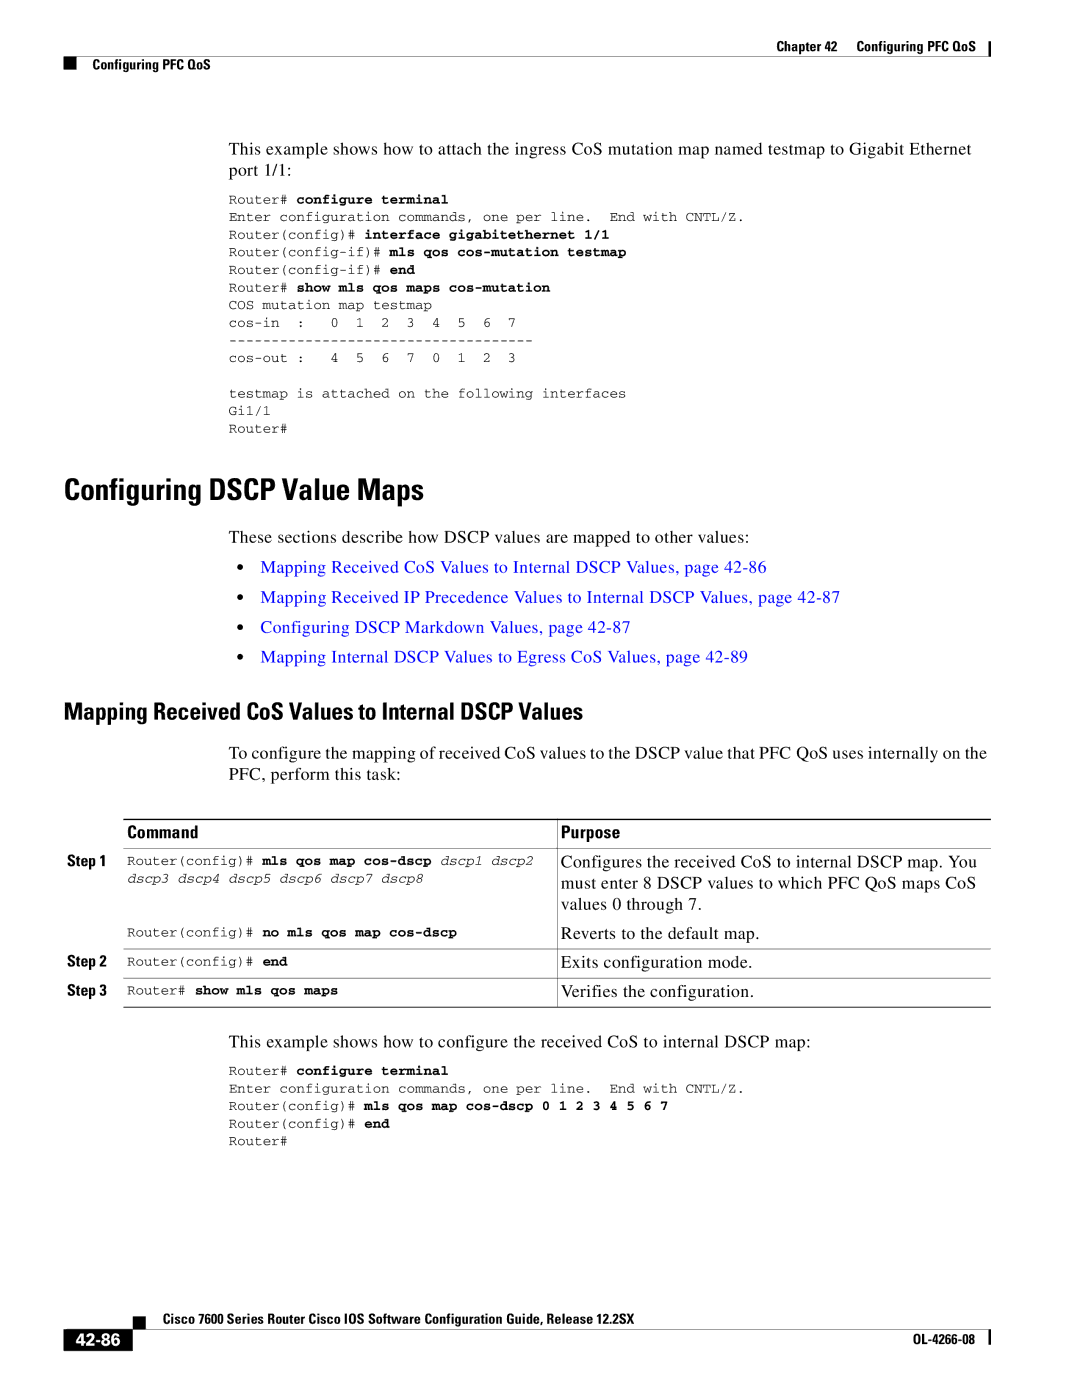 Cisco Systems OL-4266-08 manual Configuring Dscp Value Maps, Mapping Received CoS Values to Internal Dscp Values, 42-86 